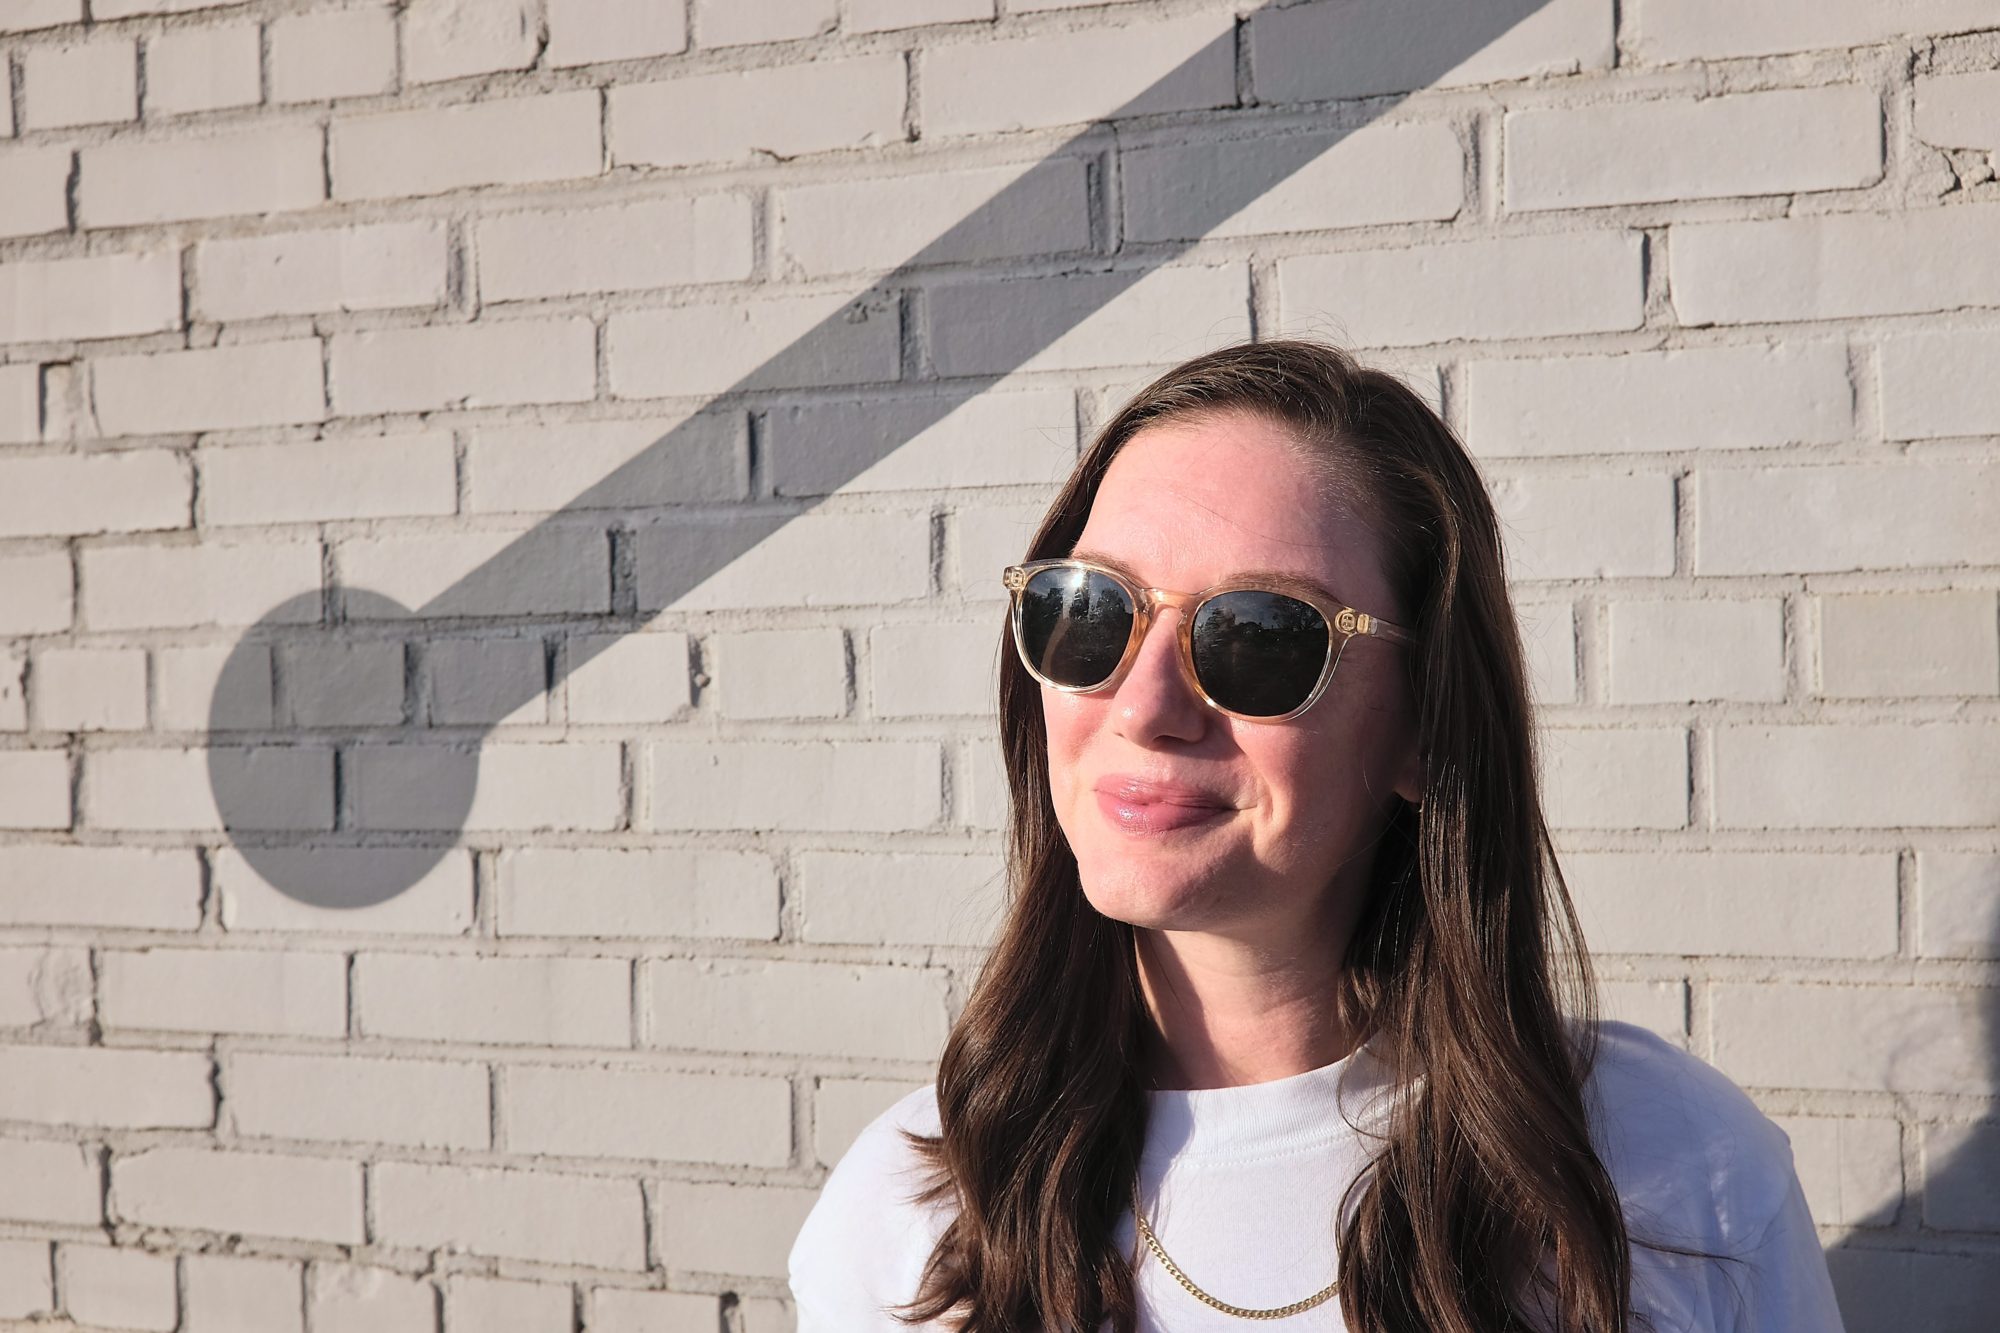 Alyssa wears a pair of clear Sunski sunglasses to share her review